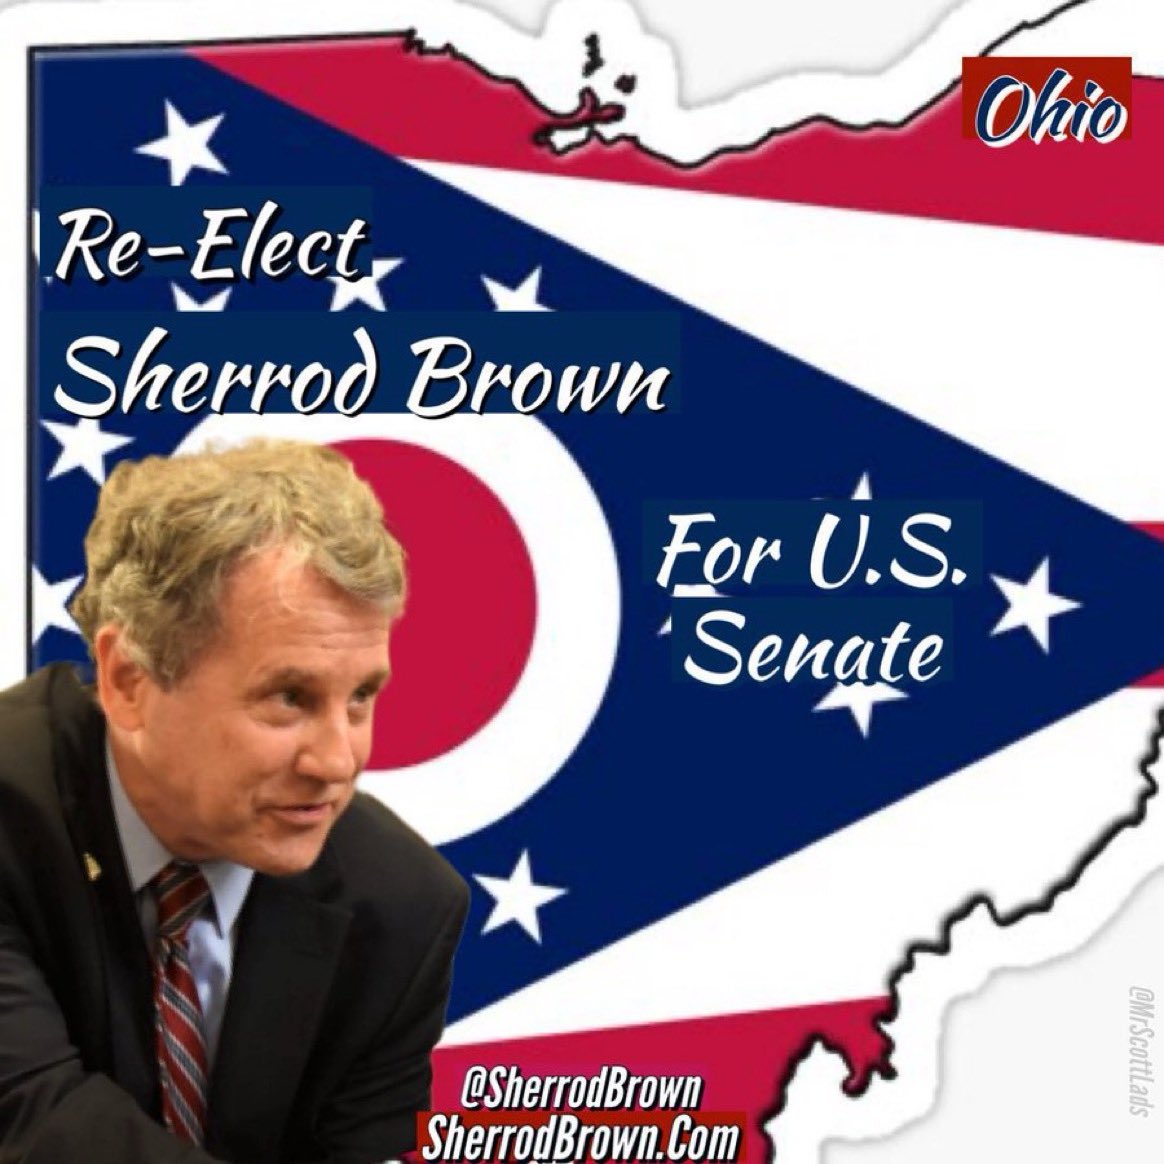 #ProudBlue #DemsUnited #wtpBLUE #wtpGOTV24 #Allied4Dems Last November, Sherrod voted to “enshrine abortion access into #OH law” - He’s always believed in a woman’s right to make medical decisions - It’s a no-brainer Bernie Moreno, Sherrod’s opponent says he’ll vote for a…